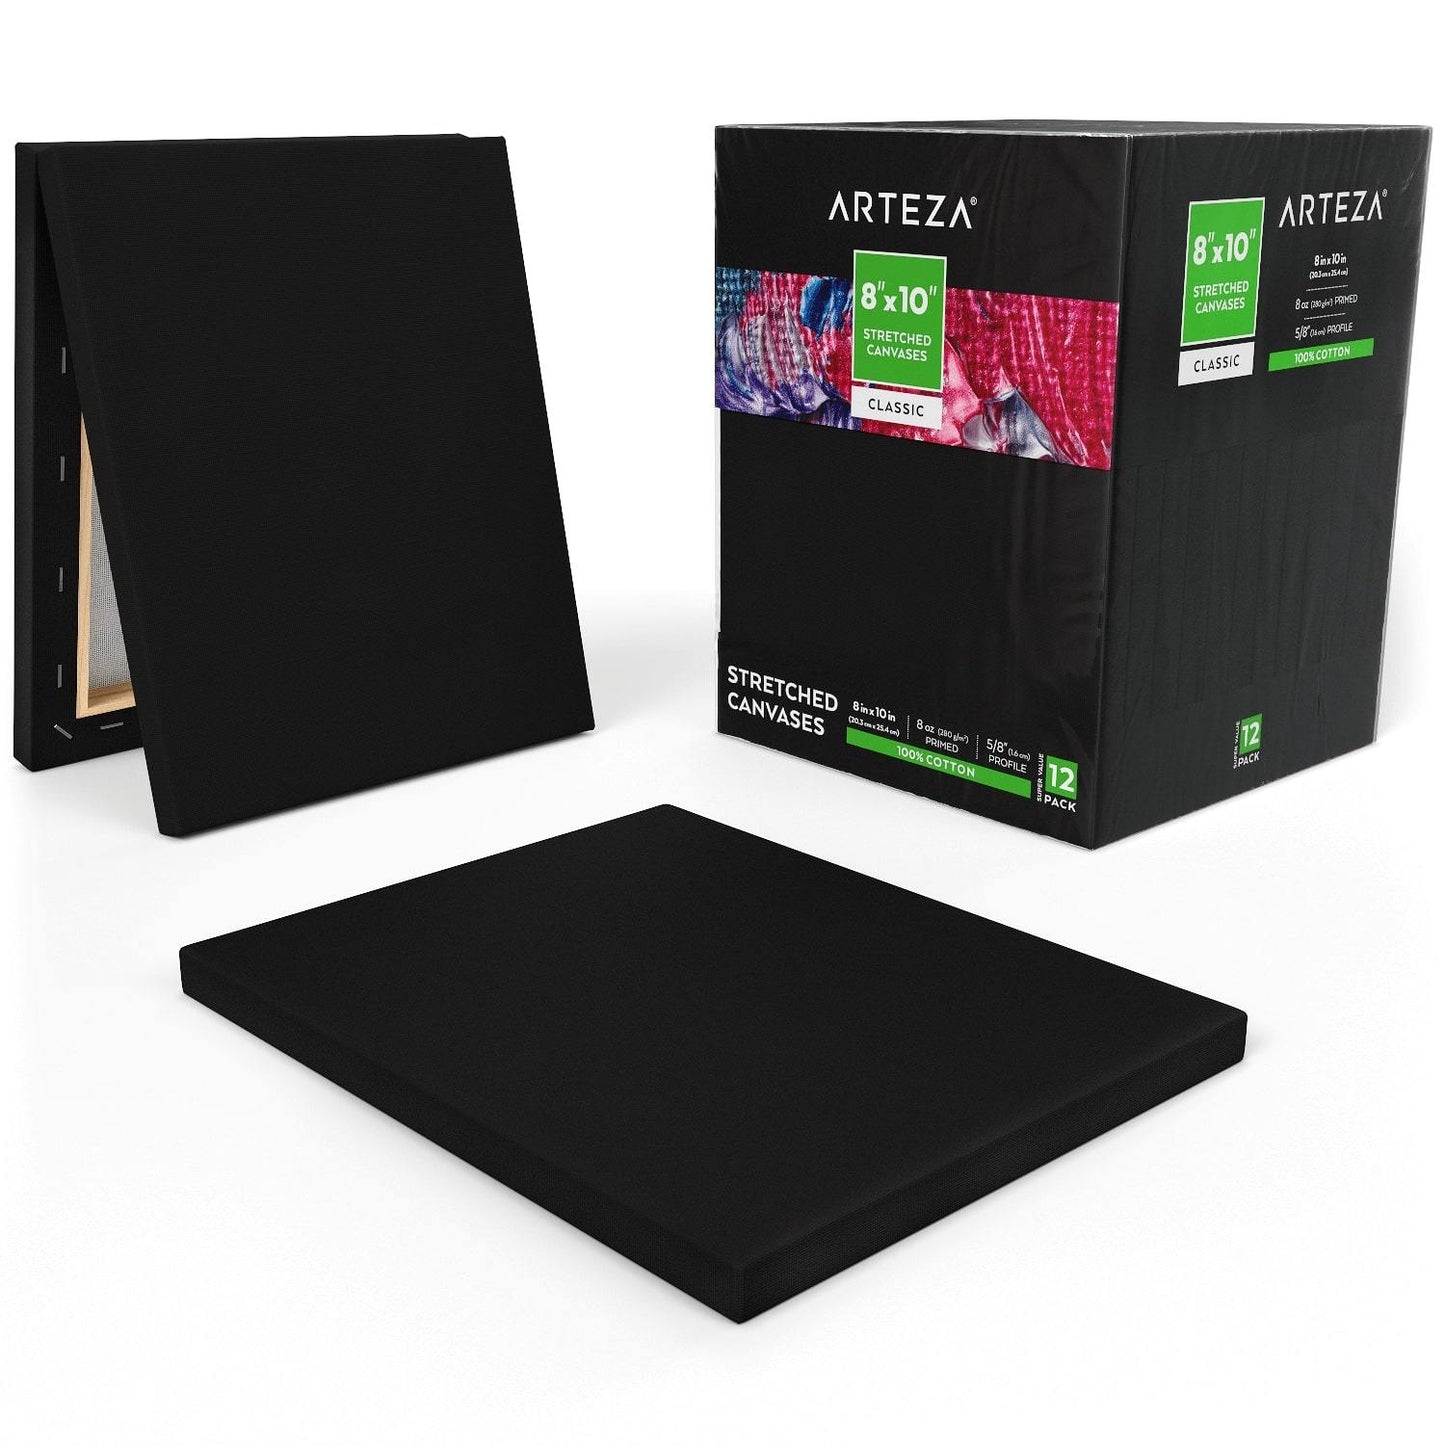 Classic Stretched Canvas, Black, 8" x 10" - Pack of 12